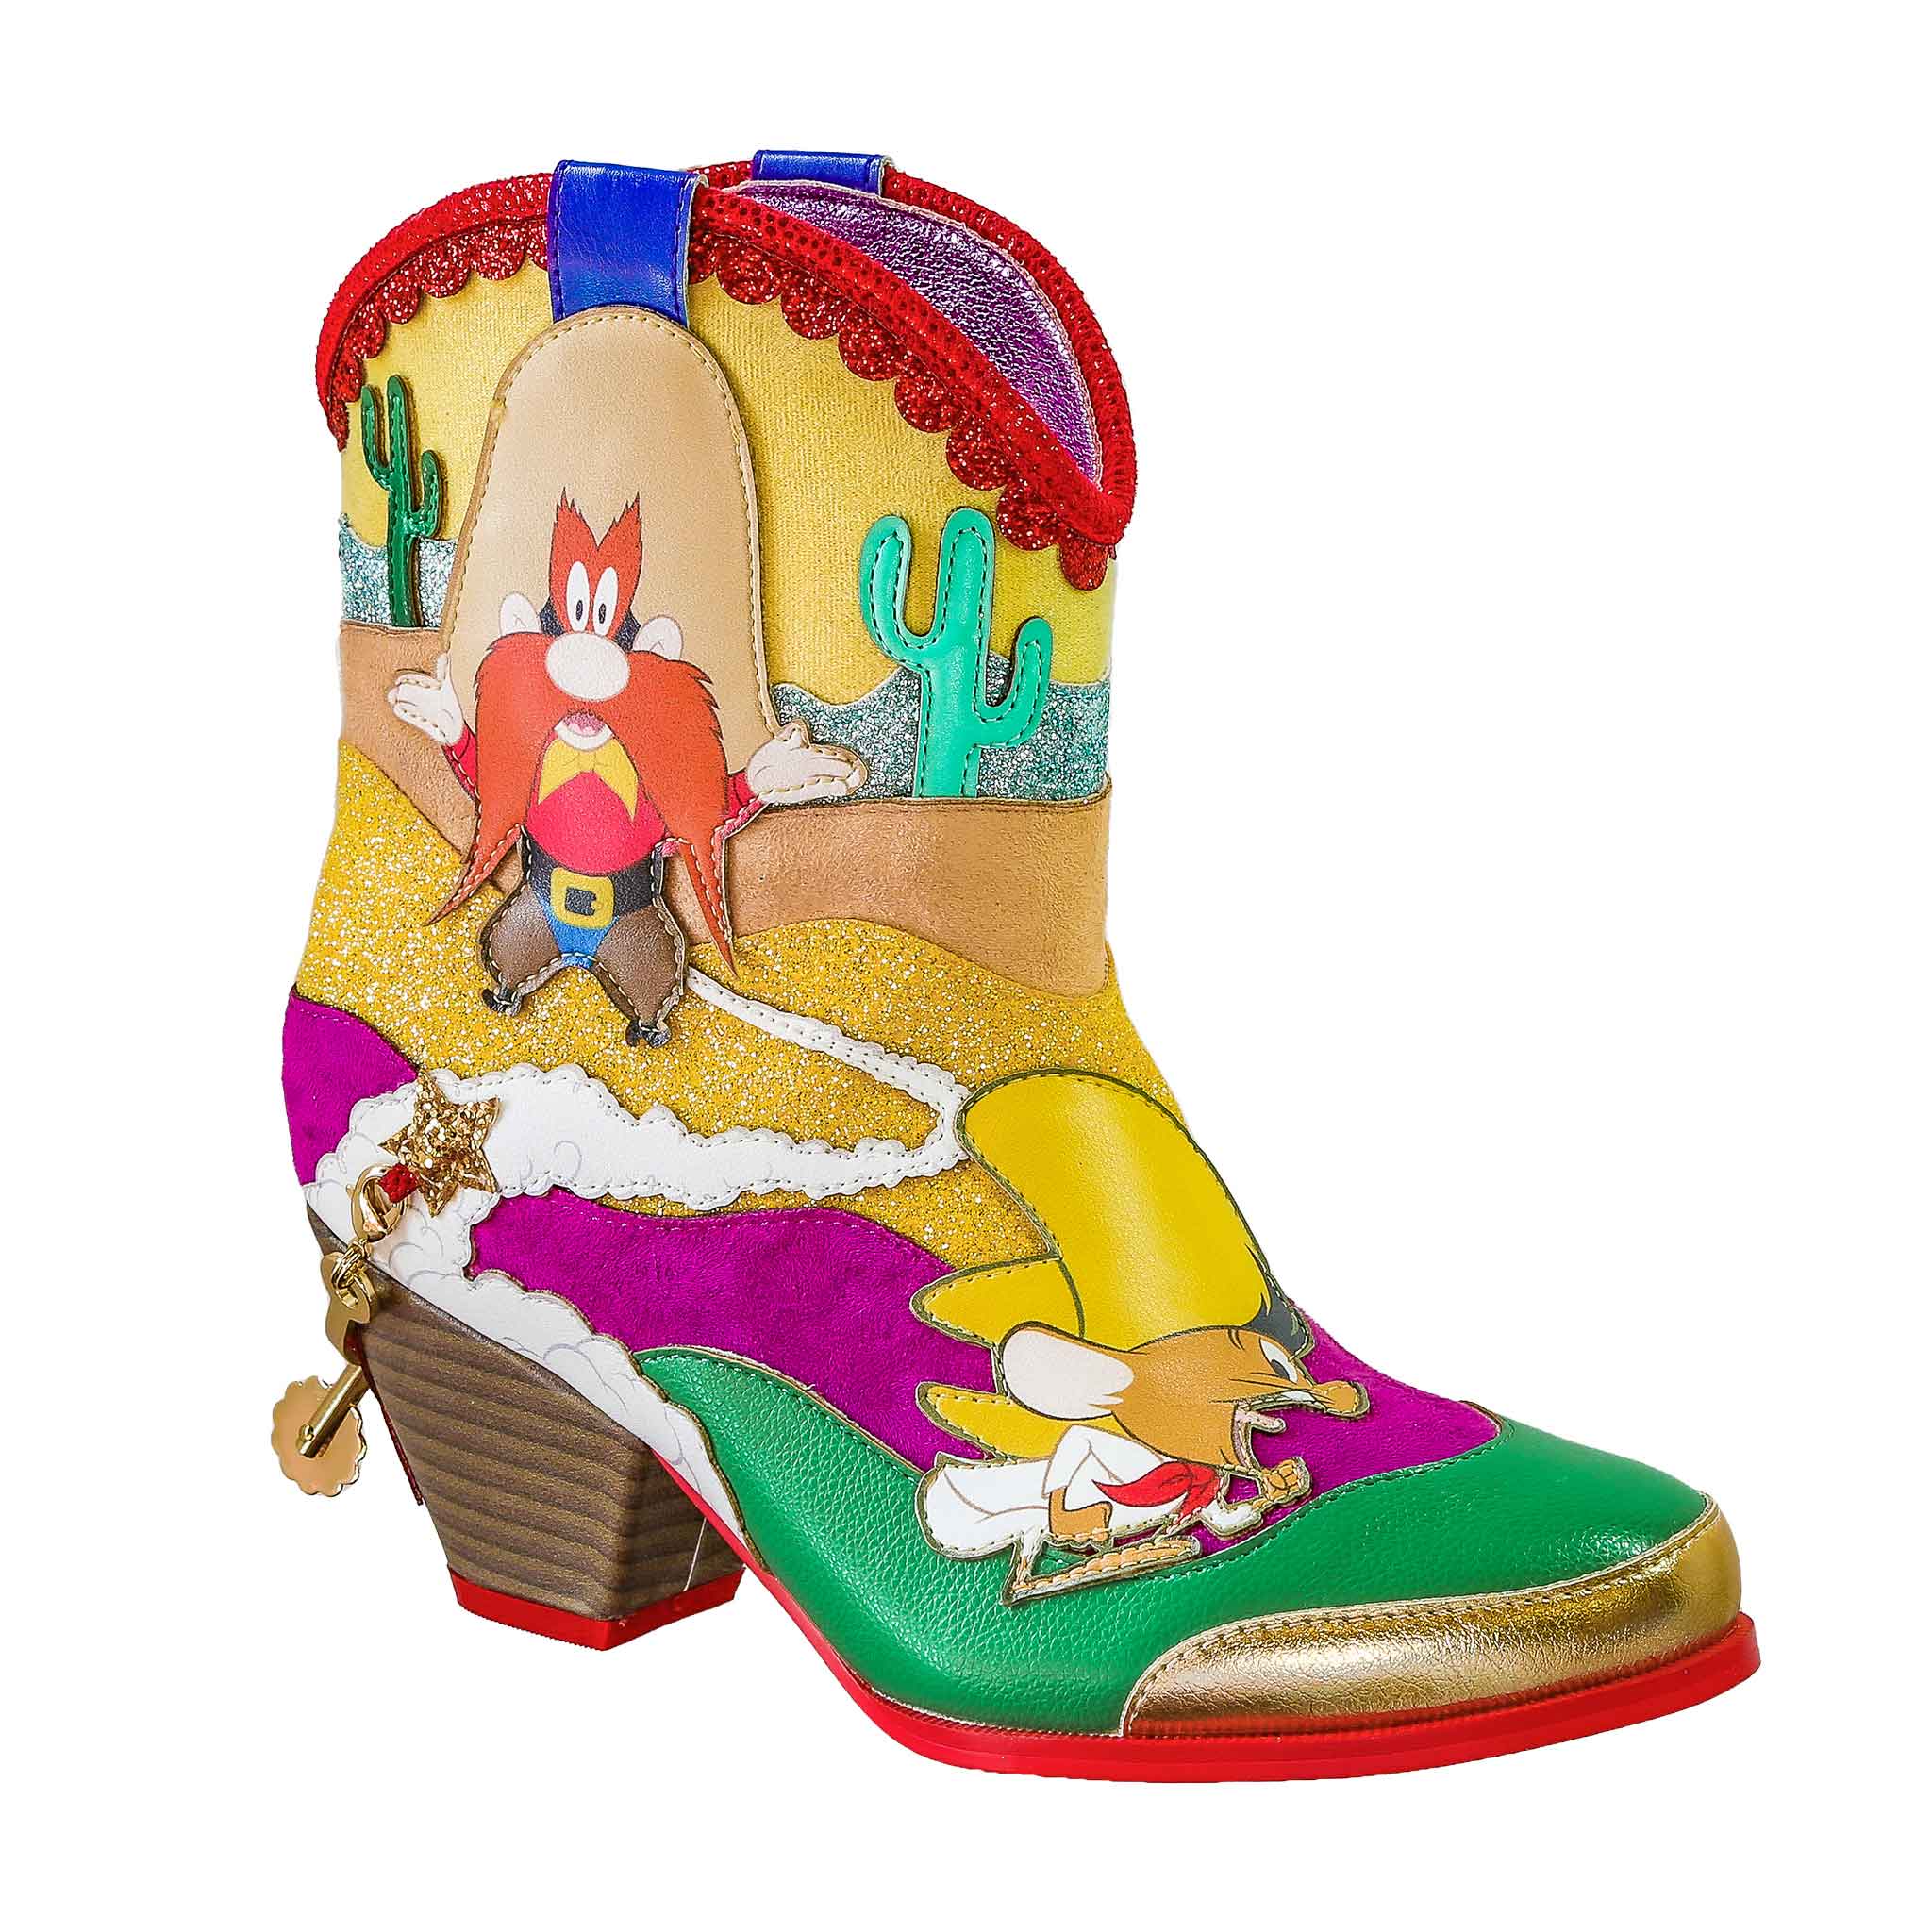 Short western style boots with a Cuban heel and blunt spurs are layered with applique colours and textures creating a desertscape scene complete with cacti. Looney Tunes characters Yosemite Sam and Speedy Gonzalez are shown on outside and toe of the shoe.